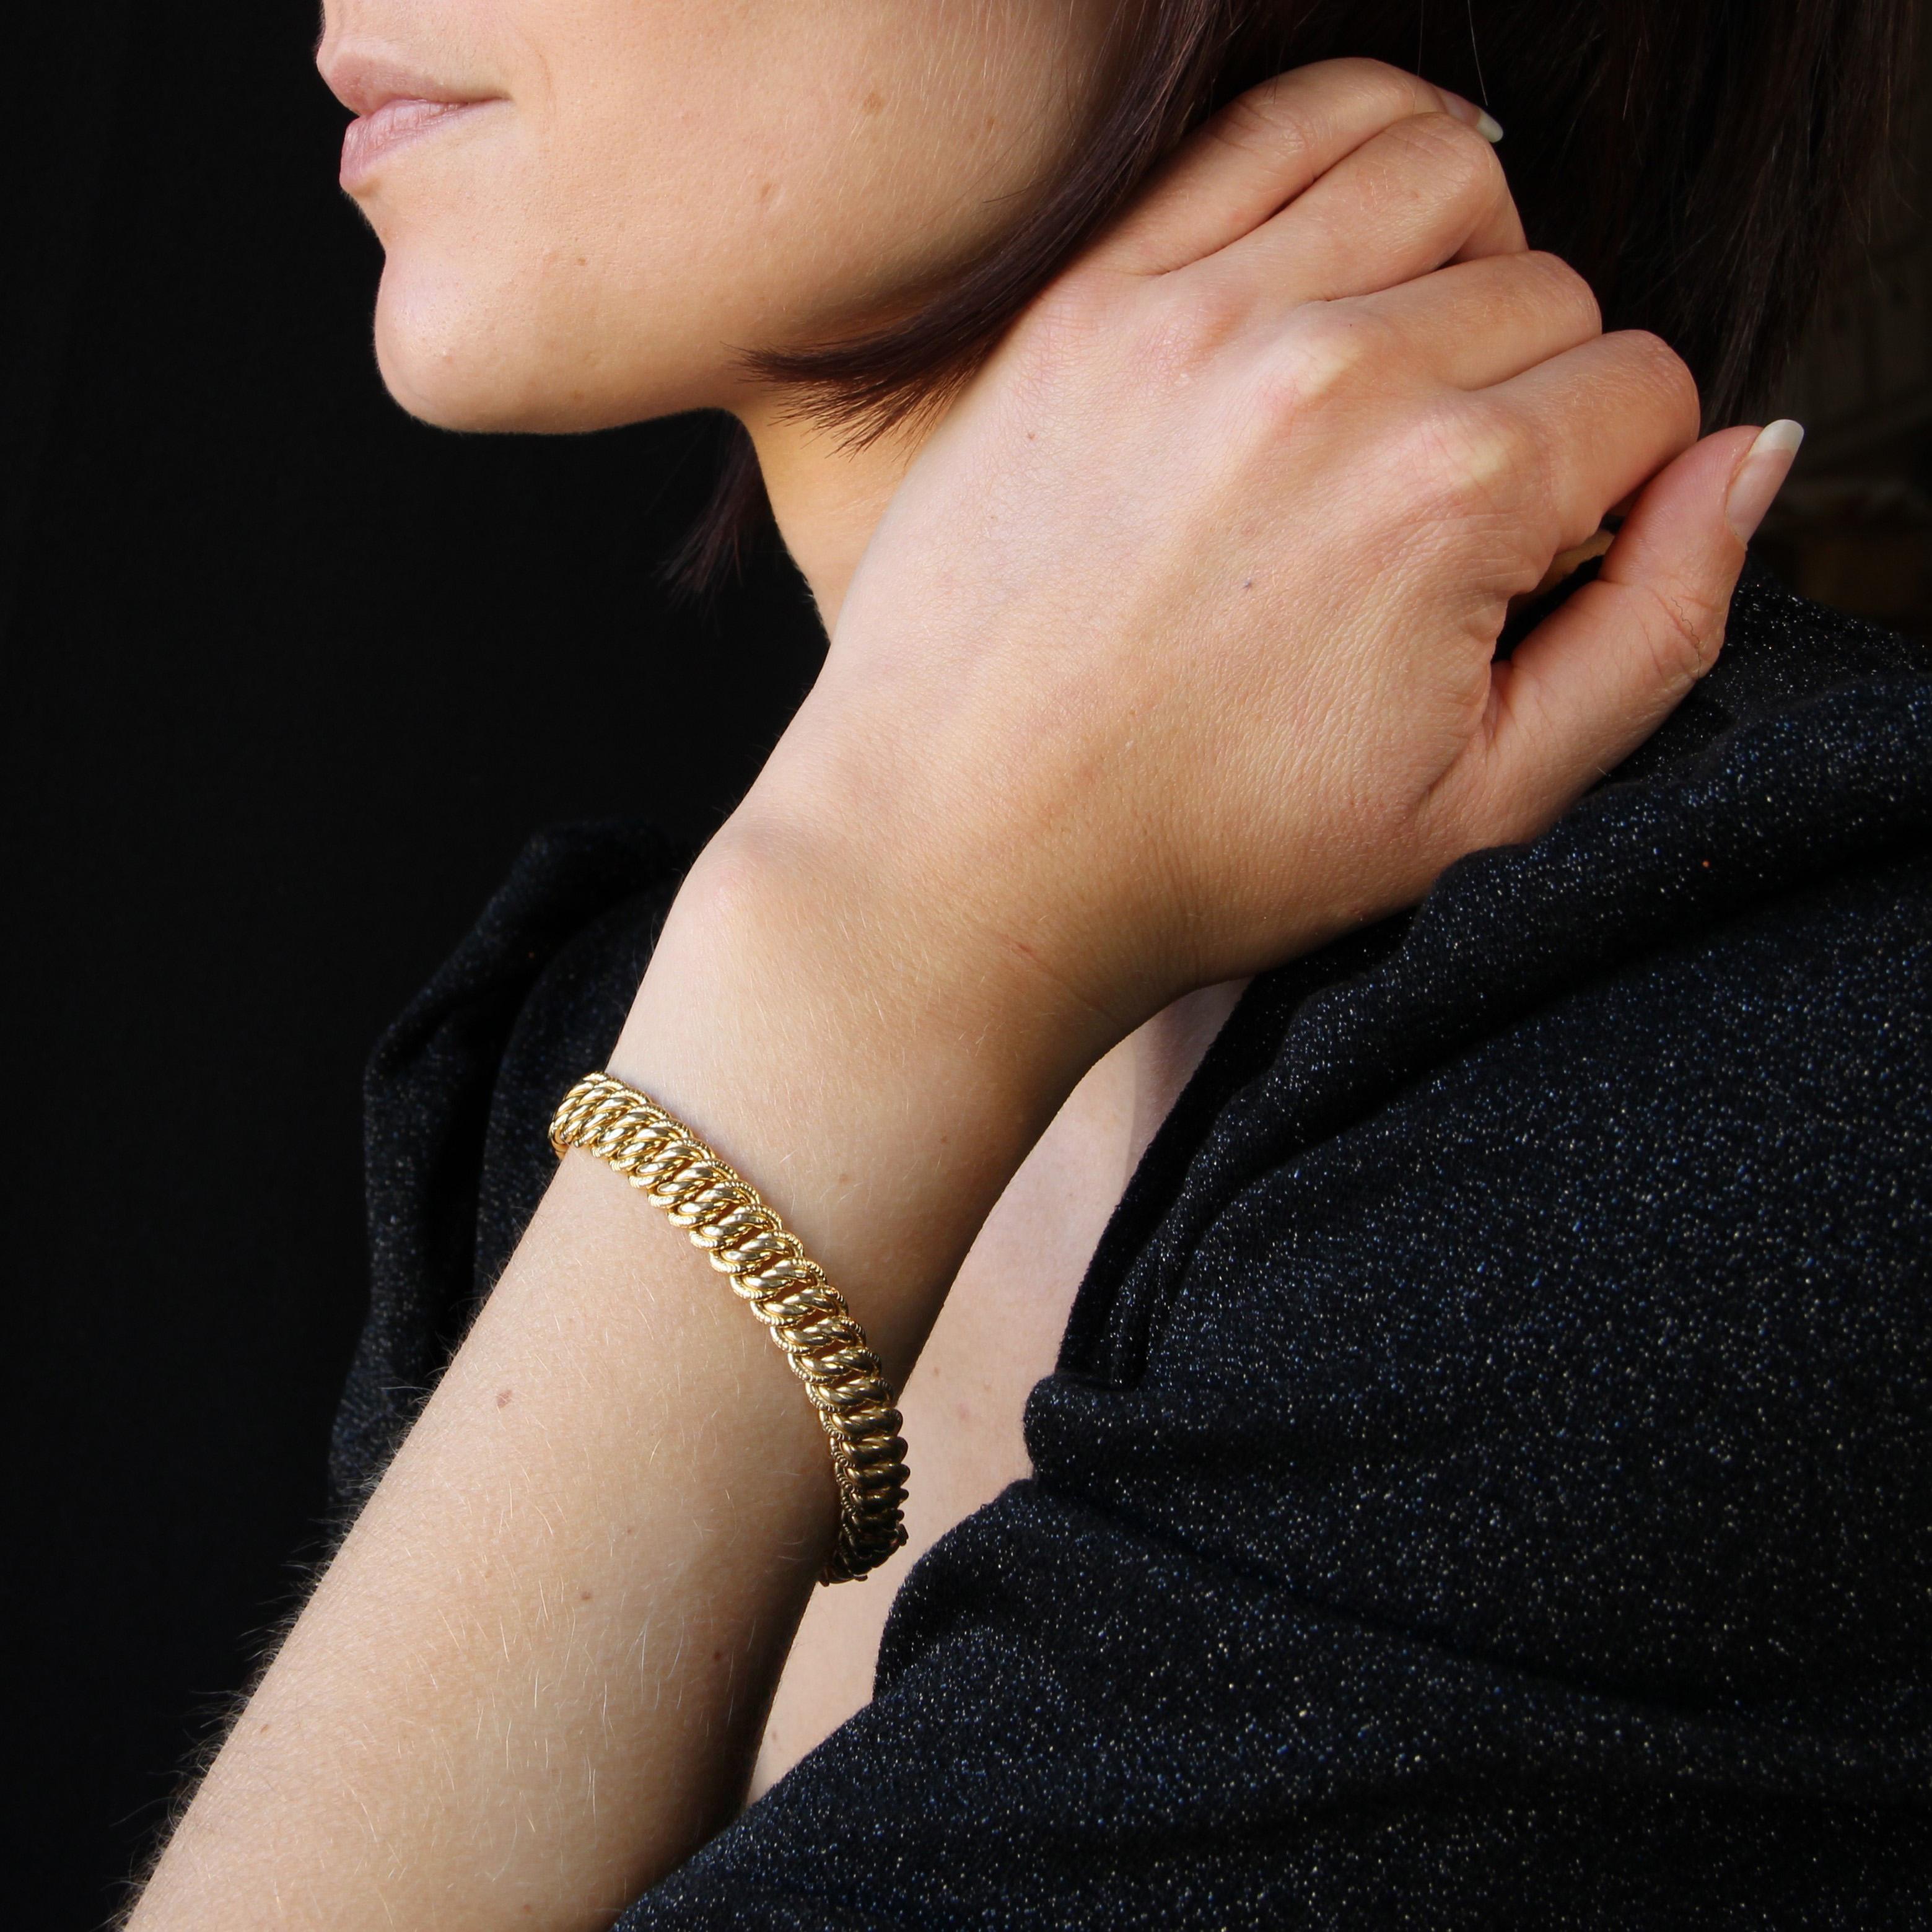 Bracelet in 18 karat yellow gold, eagle head hallmark.
A classic piece of antique jewelry, this bracelet is made of American gourmette mesh, chased on the edges and smooth on the reverse. The clasp is a ratchet clasp with a double 